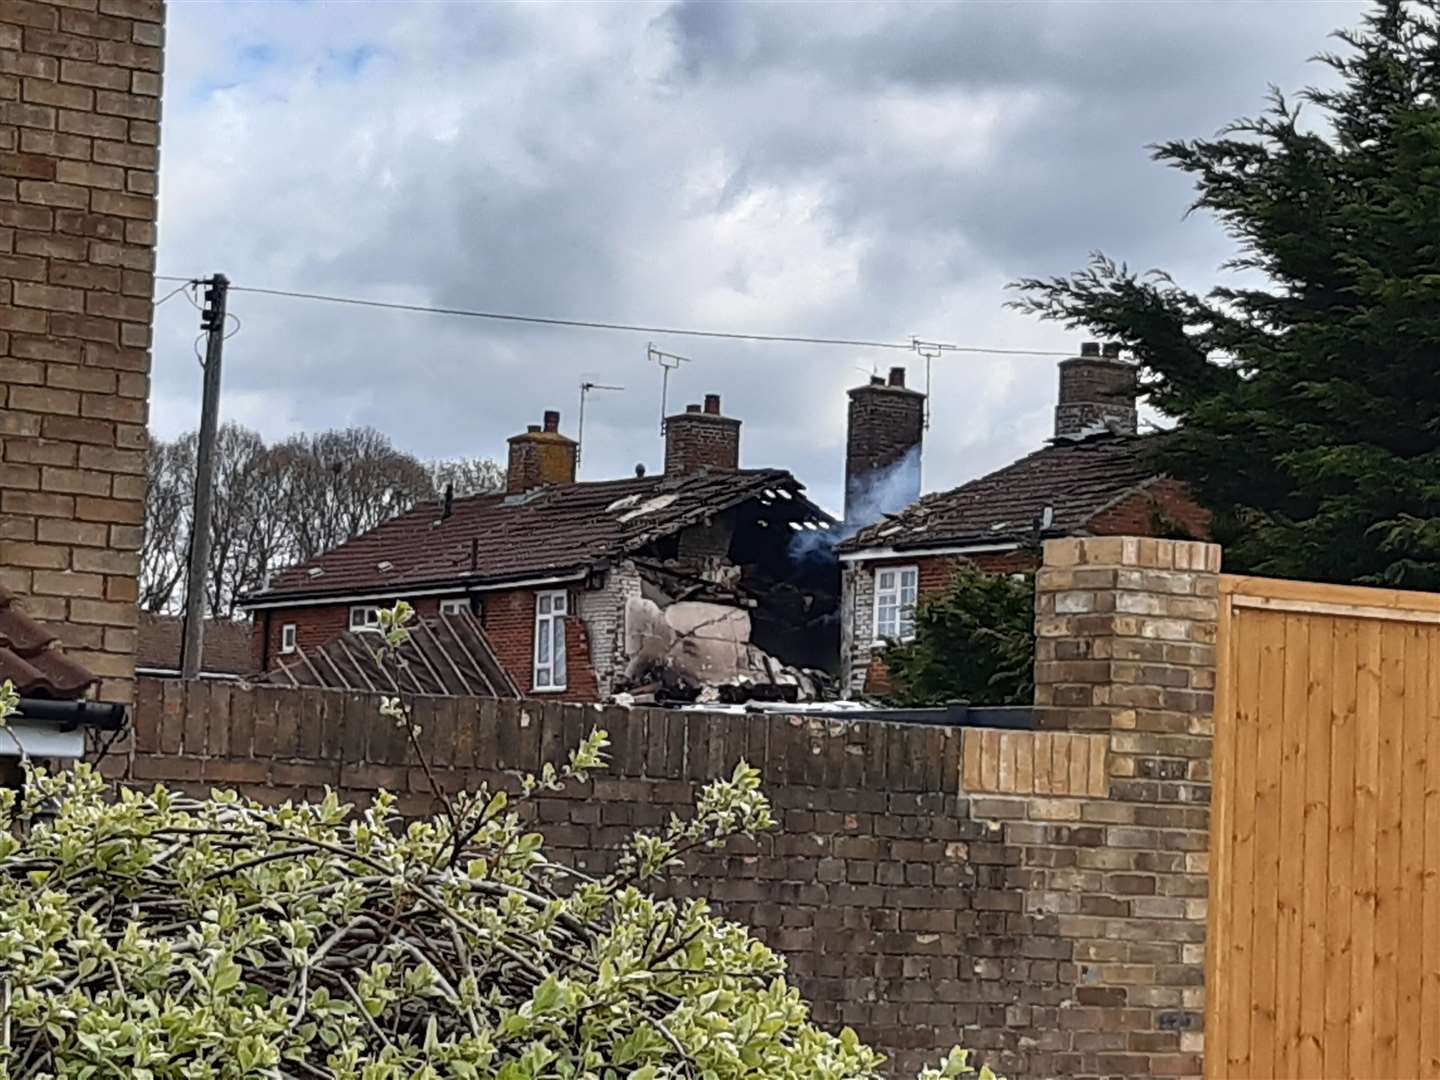 The back of the house in Mill View, Willesborough, destroyed in the explosion